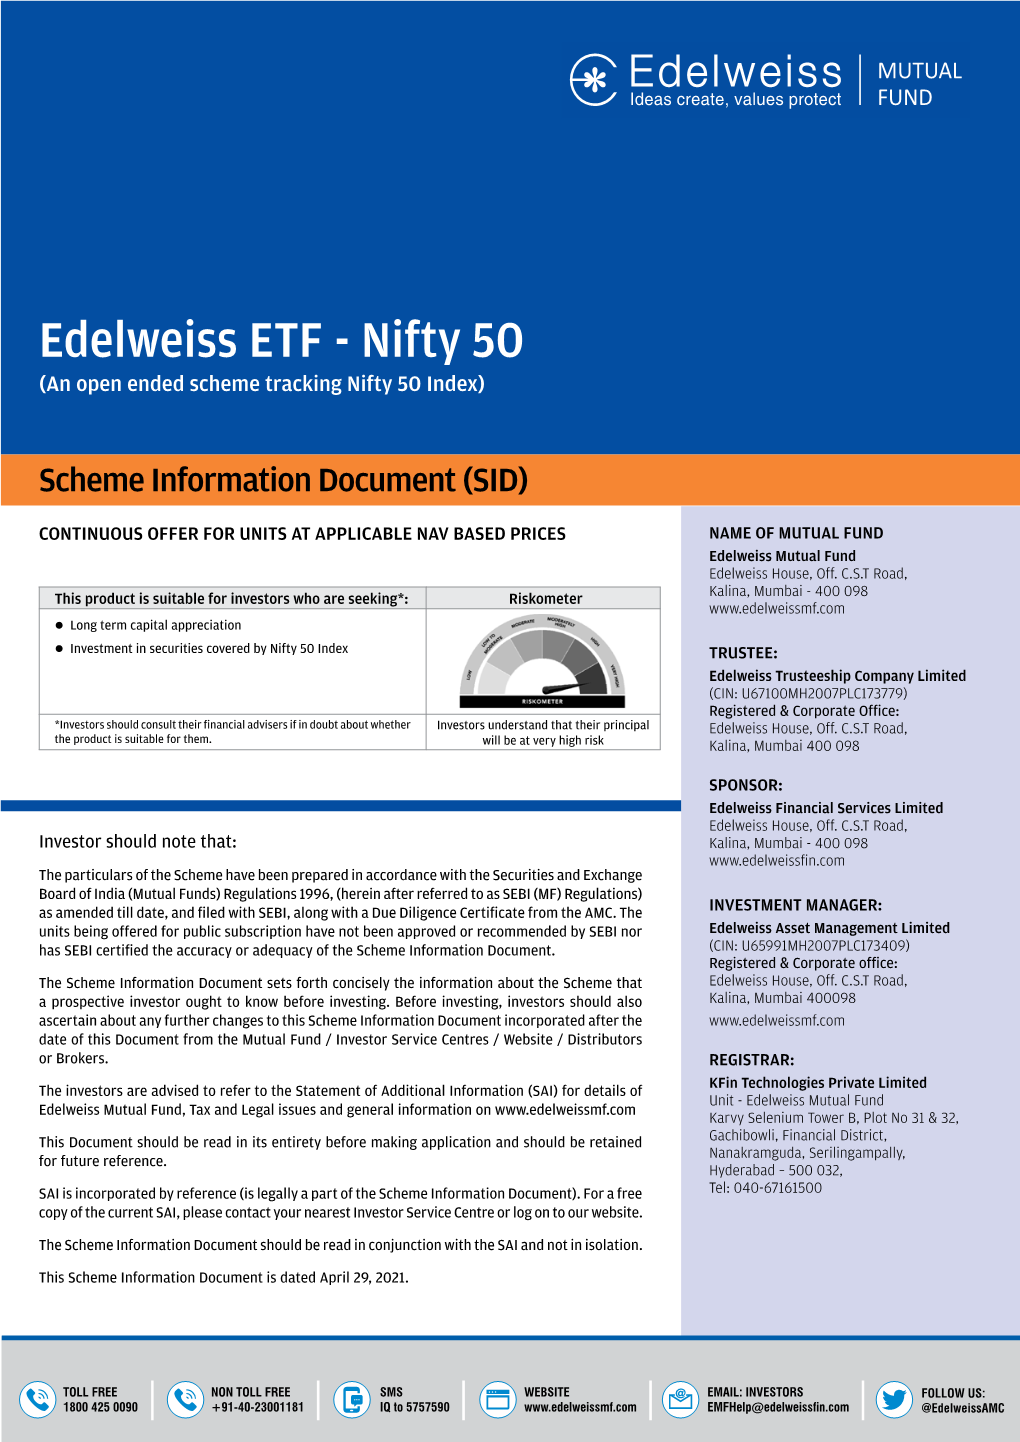 Edelweiss ETF - Nifty 50 MUTUAL (An Open Ended Scheme Tracking Nifty 50 Index) FUND